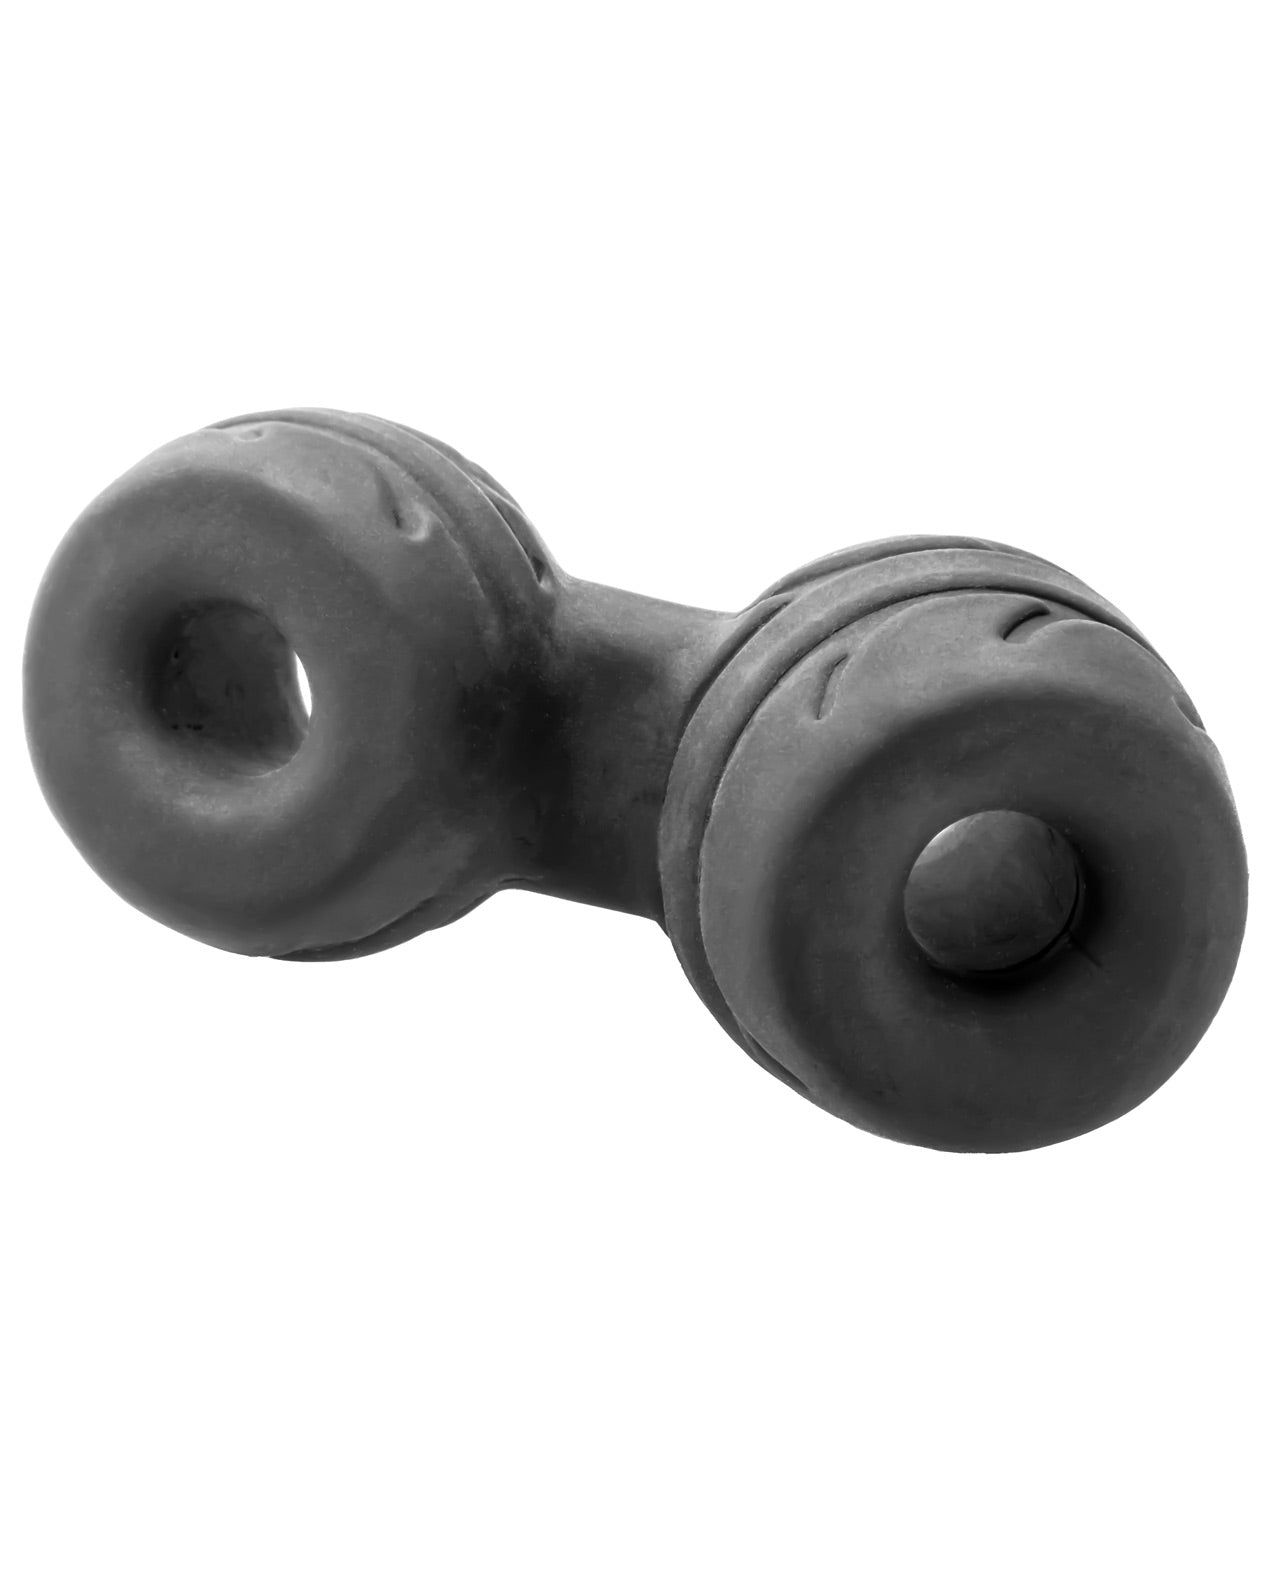 Perfect Fit Silaskin Cock & Ball Ring - Black - LUST Depot